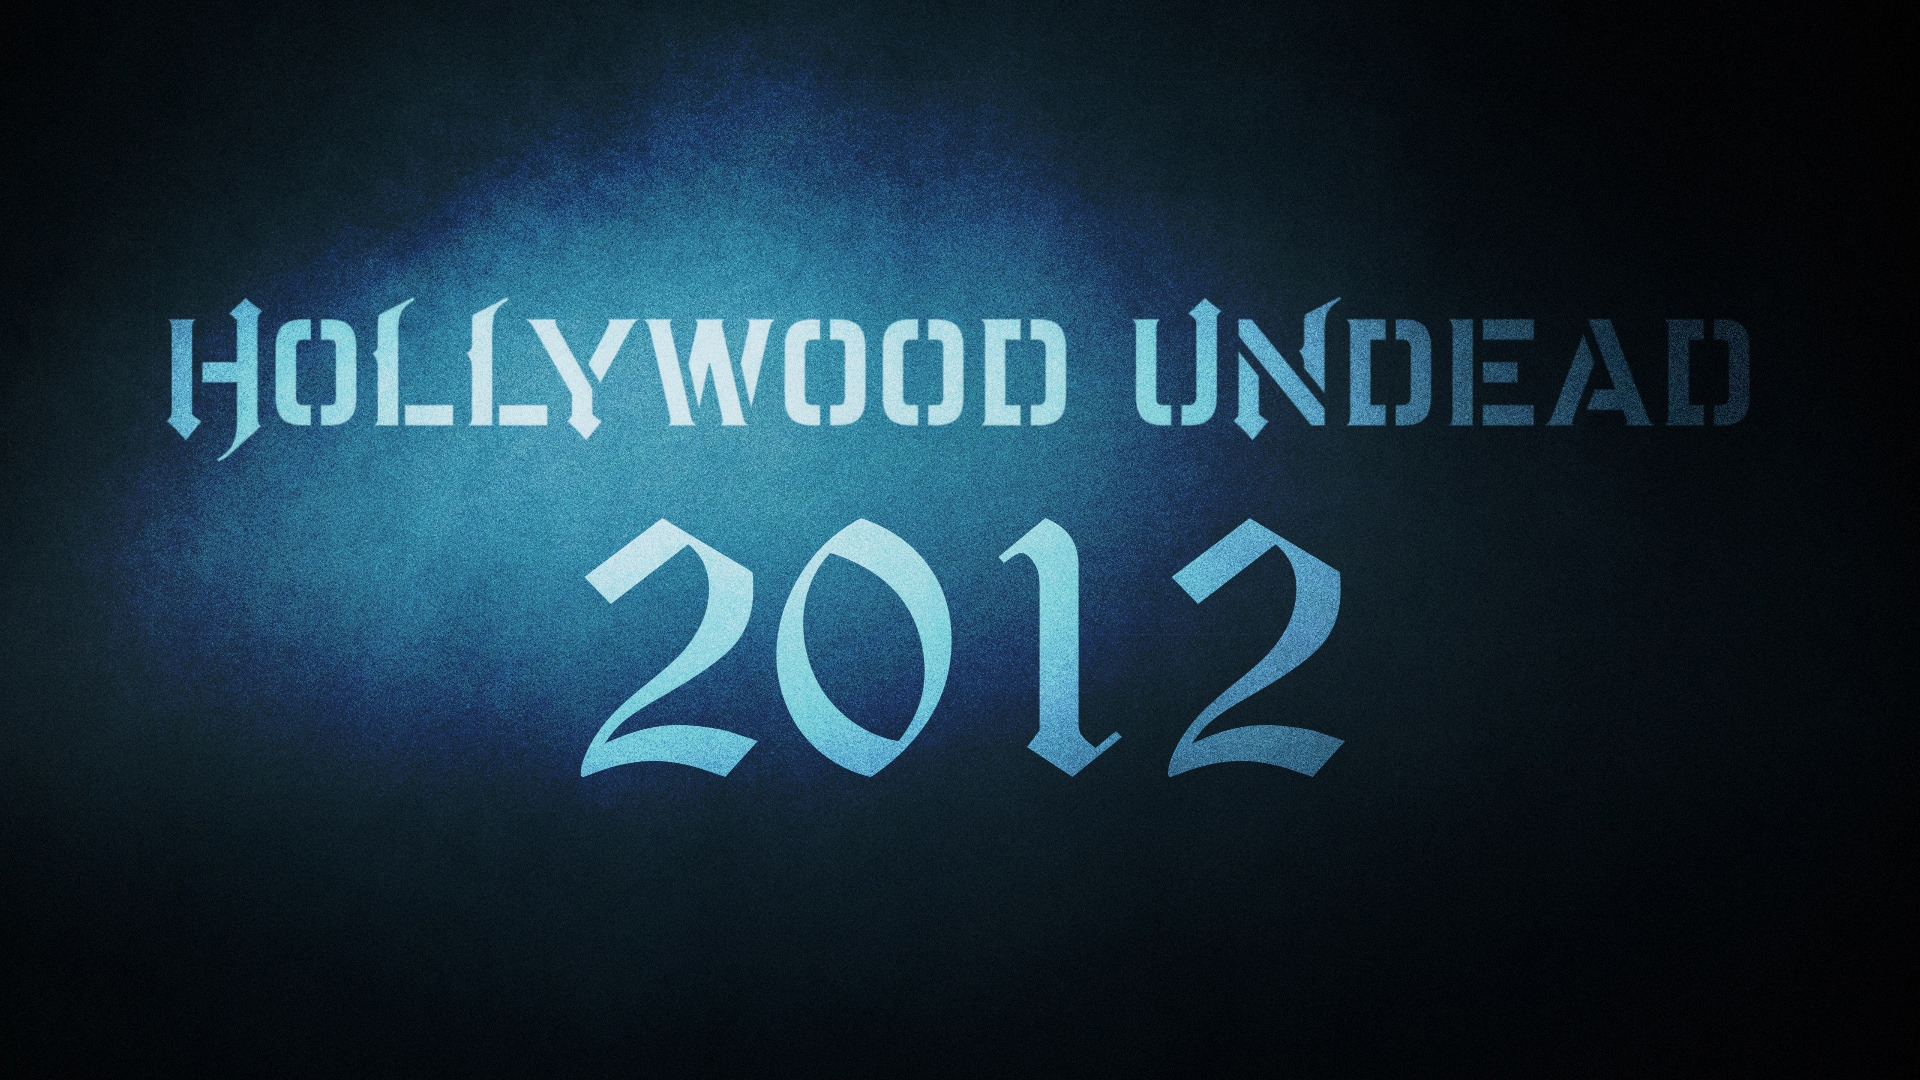 Hollywood Undead 2012 for 1920 x 1080 HDTV 1080p resolution